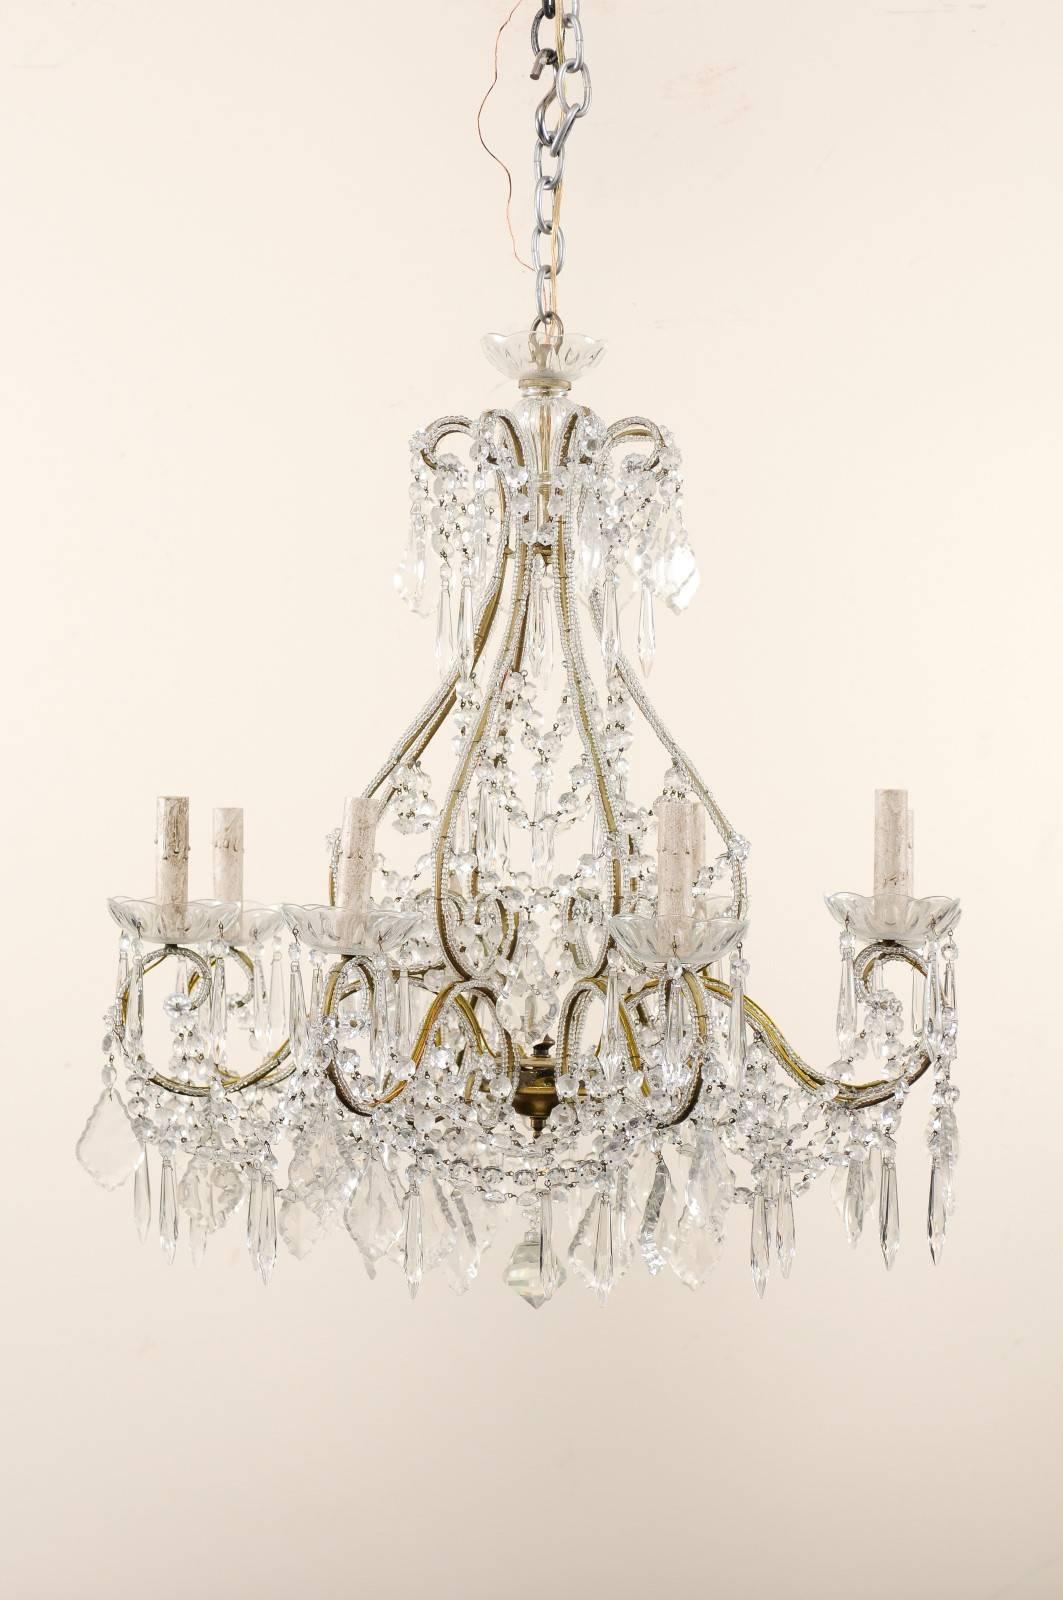 A French midcentury crystal chandelier. This French chandelier from the mid-20th century features delicately scrolled body adorn with various crystals. The armature of gilded iron is ornate with glass beading along it's structure. There is a